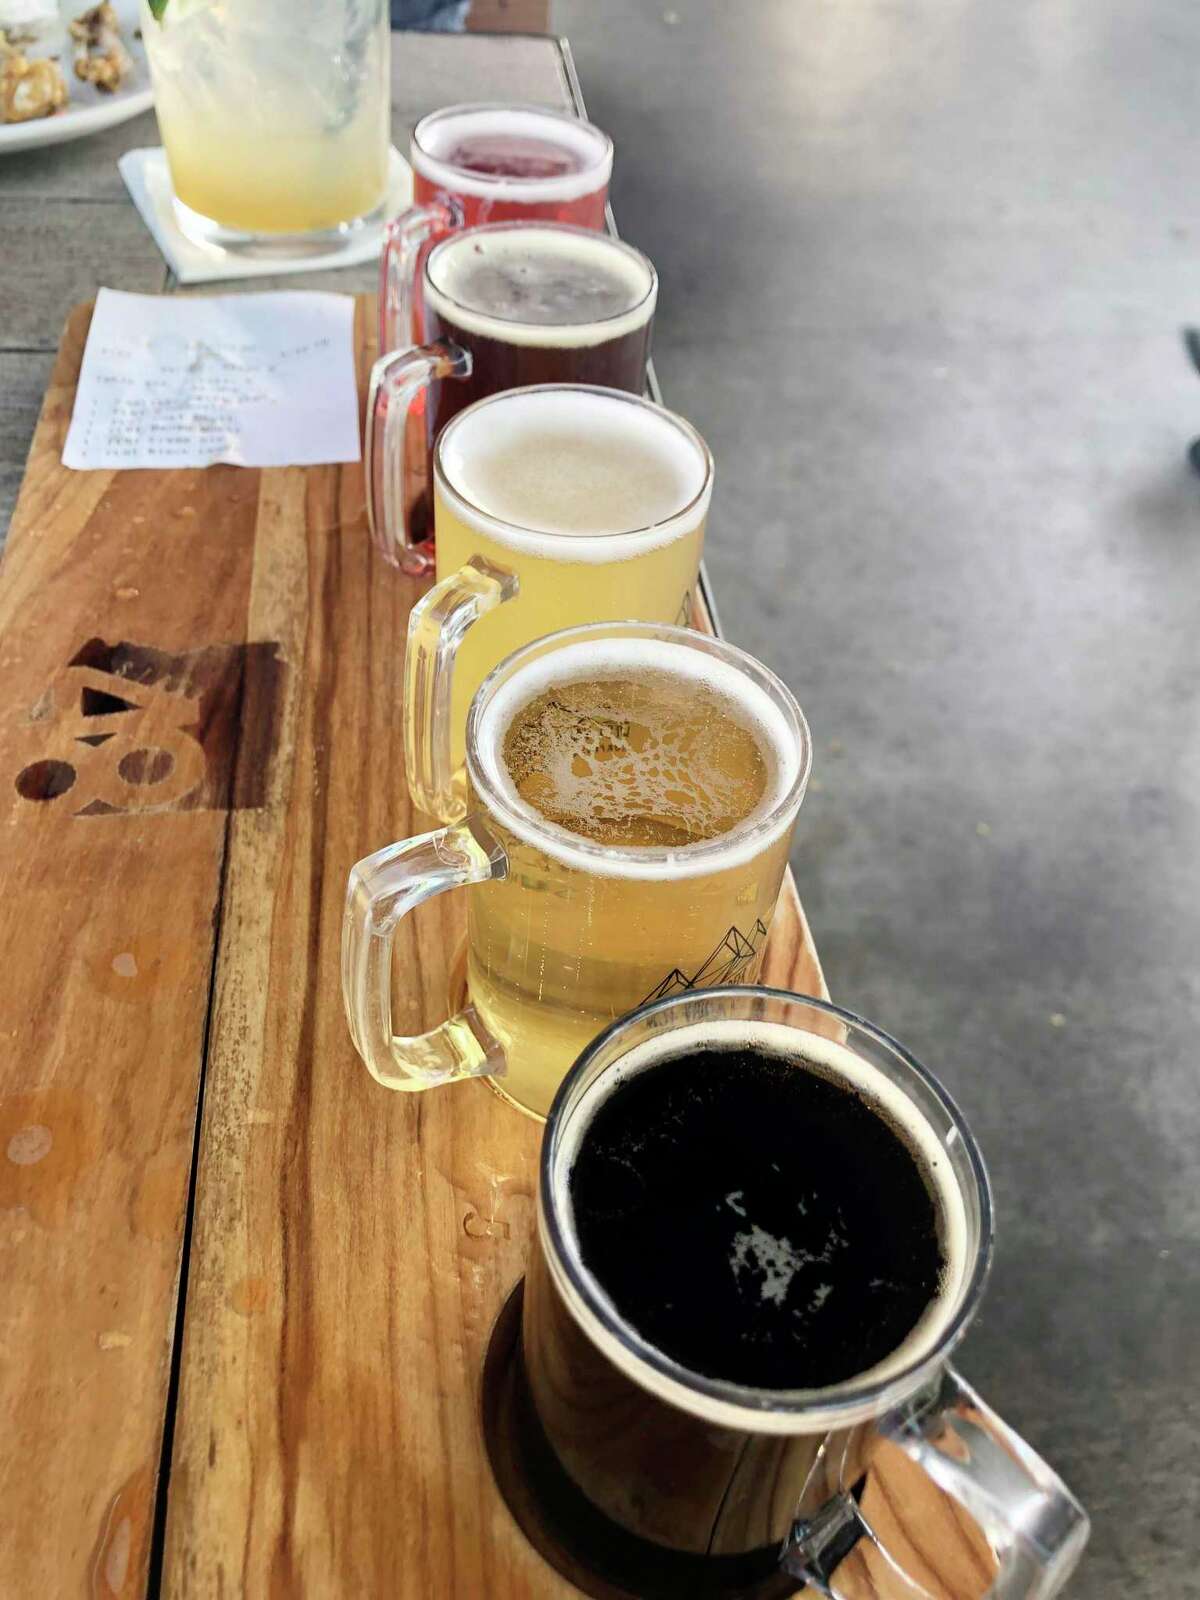 Last year was difficult for West Michigan breweries with several closing permanently. But state grants are helping keep other breweries open. (Morguefile photo)